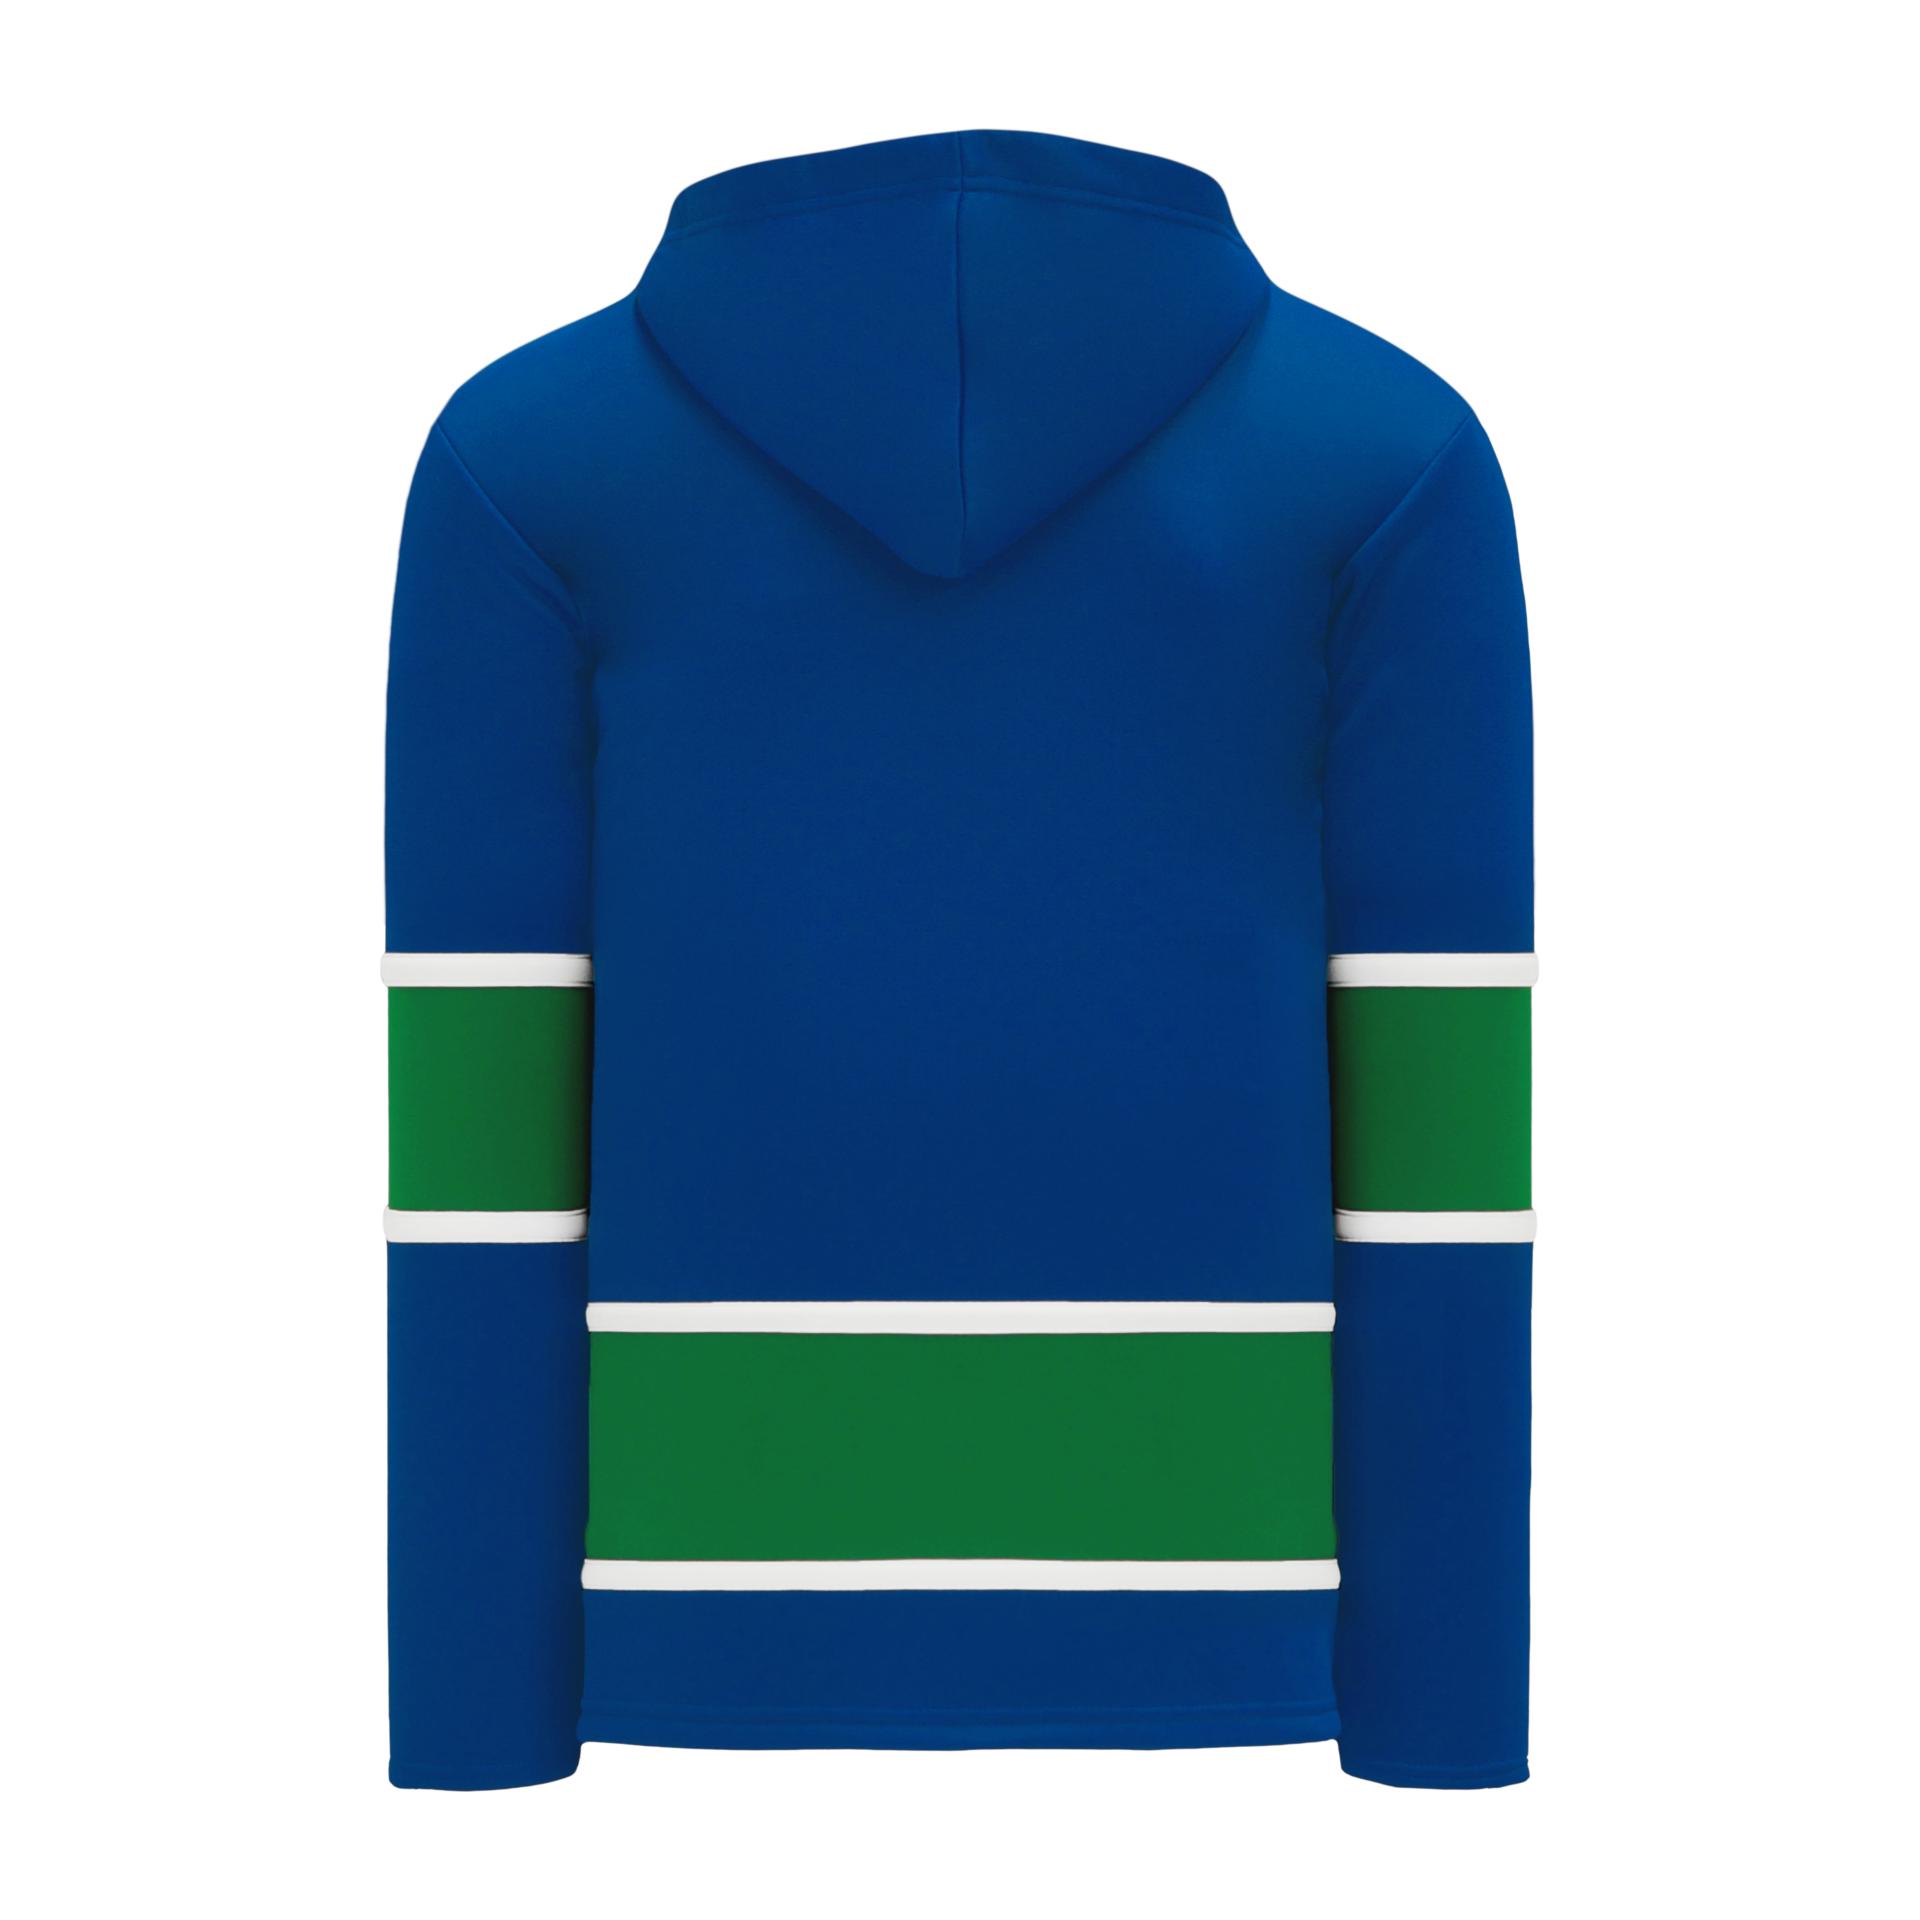 A1850-722 Vancouver Canucks Blank Hockey Lace Hoodie ...